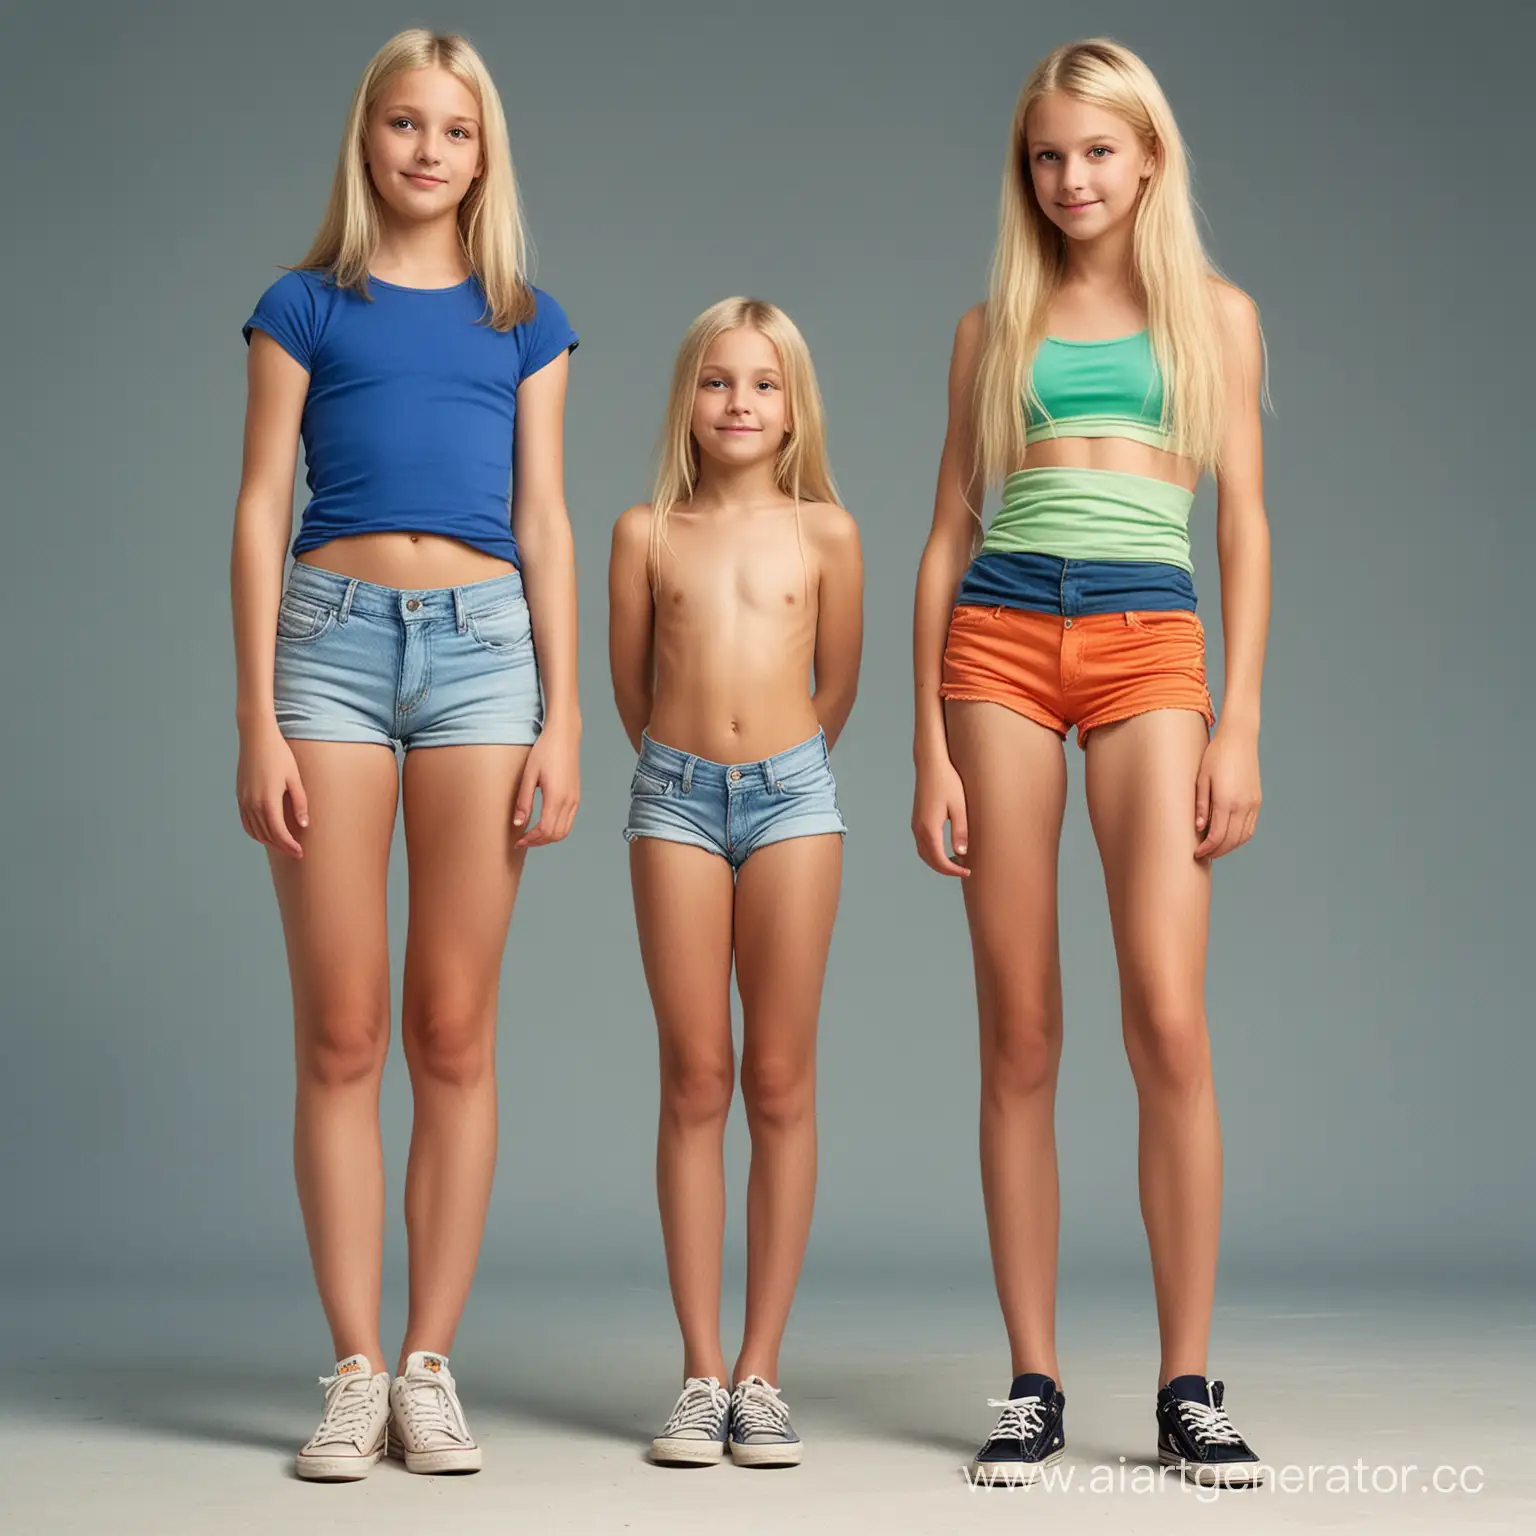 little old man looks up to giant 12yo girl very tall leggy 12yo buxom blonde girl taller a little old man halfher size, cute innocent face slim waist lo rise shorts midriff tall statuesque 12yo girl overlooks little old man, 